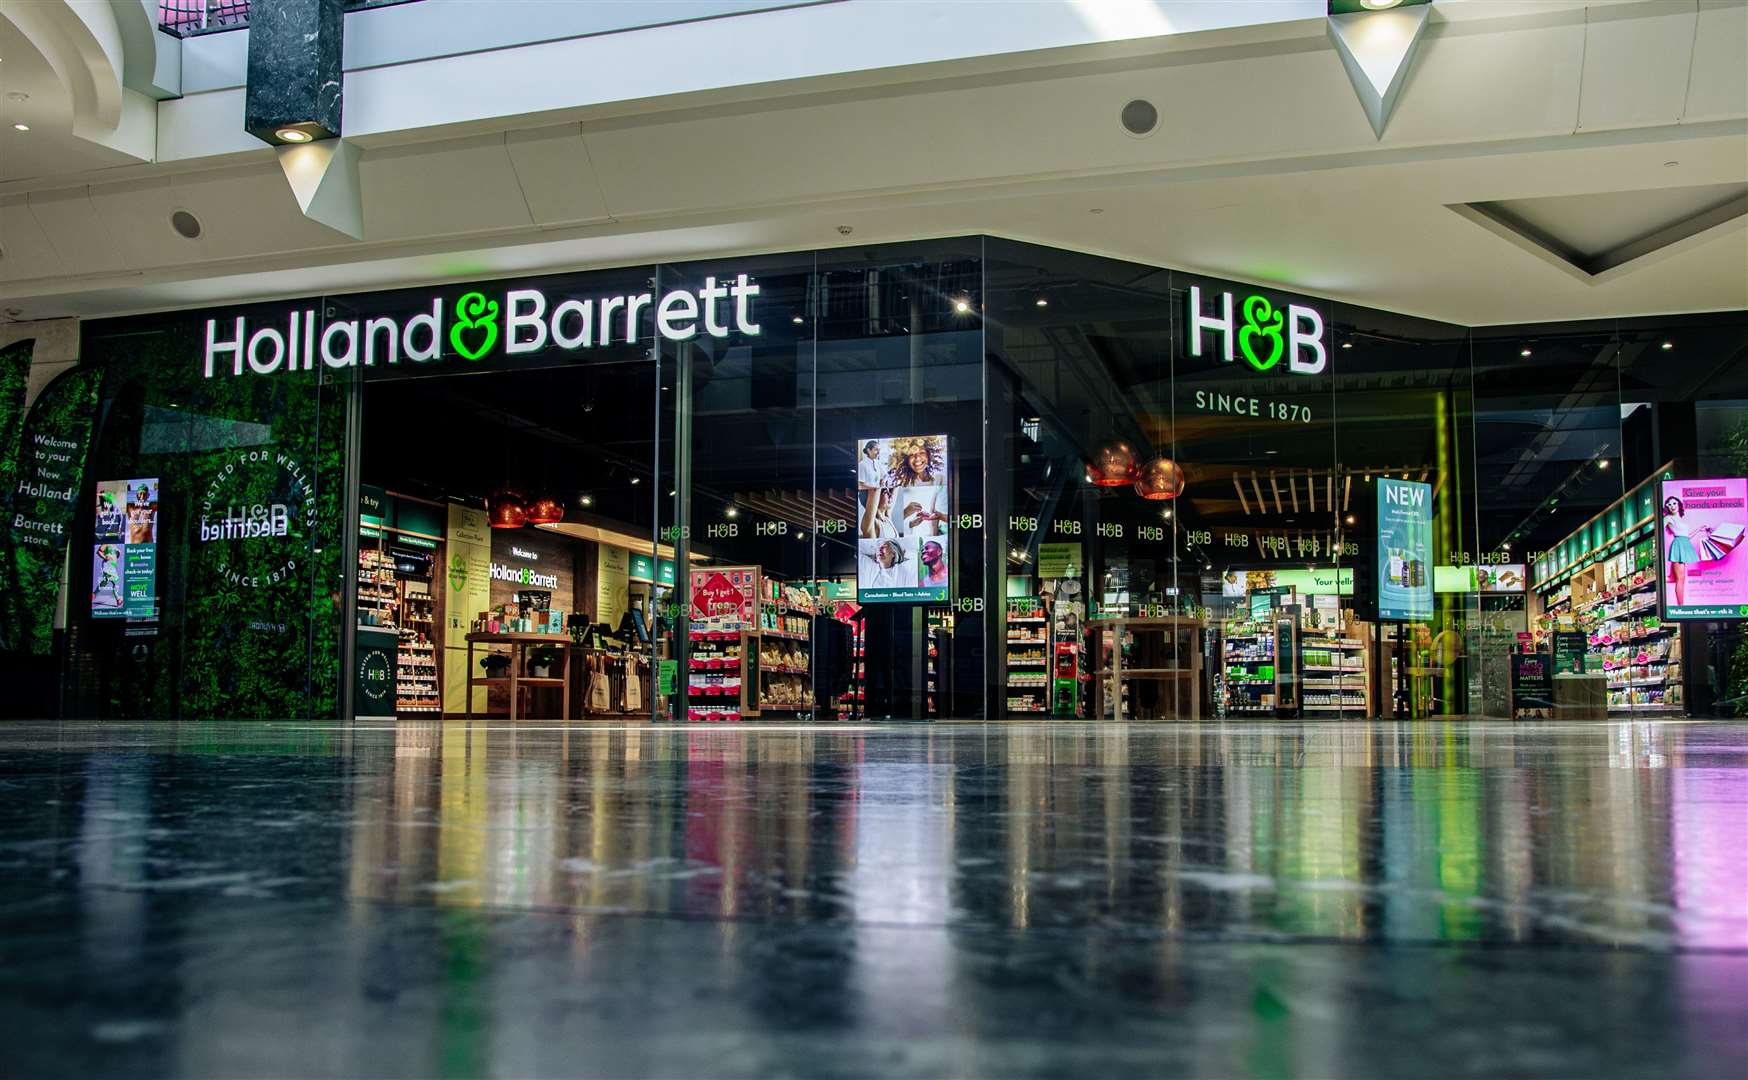 Holland & Barrett has opened the doors to its revamped store at Bluewater Shopping Centre